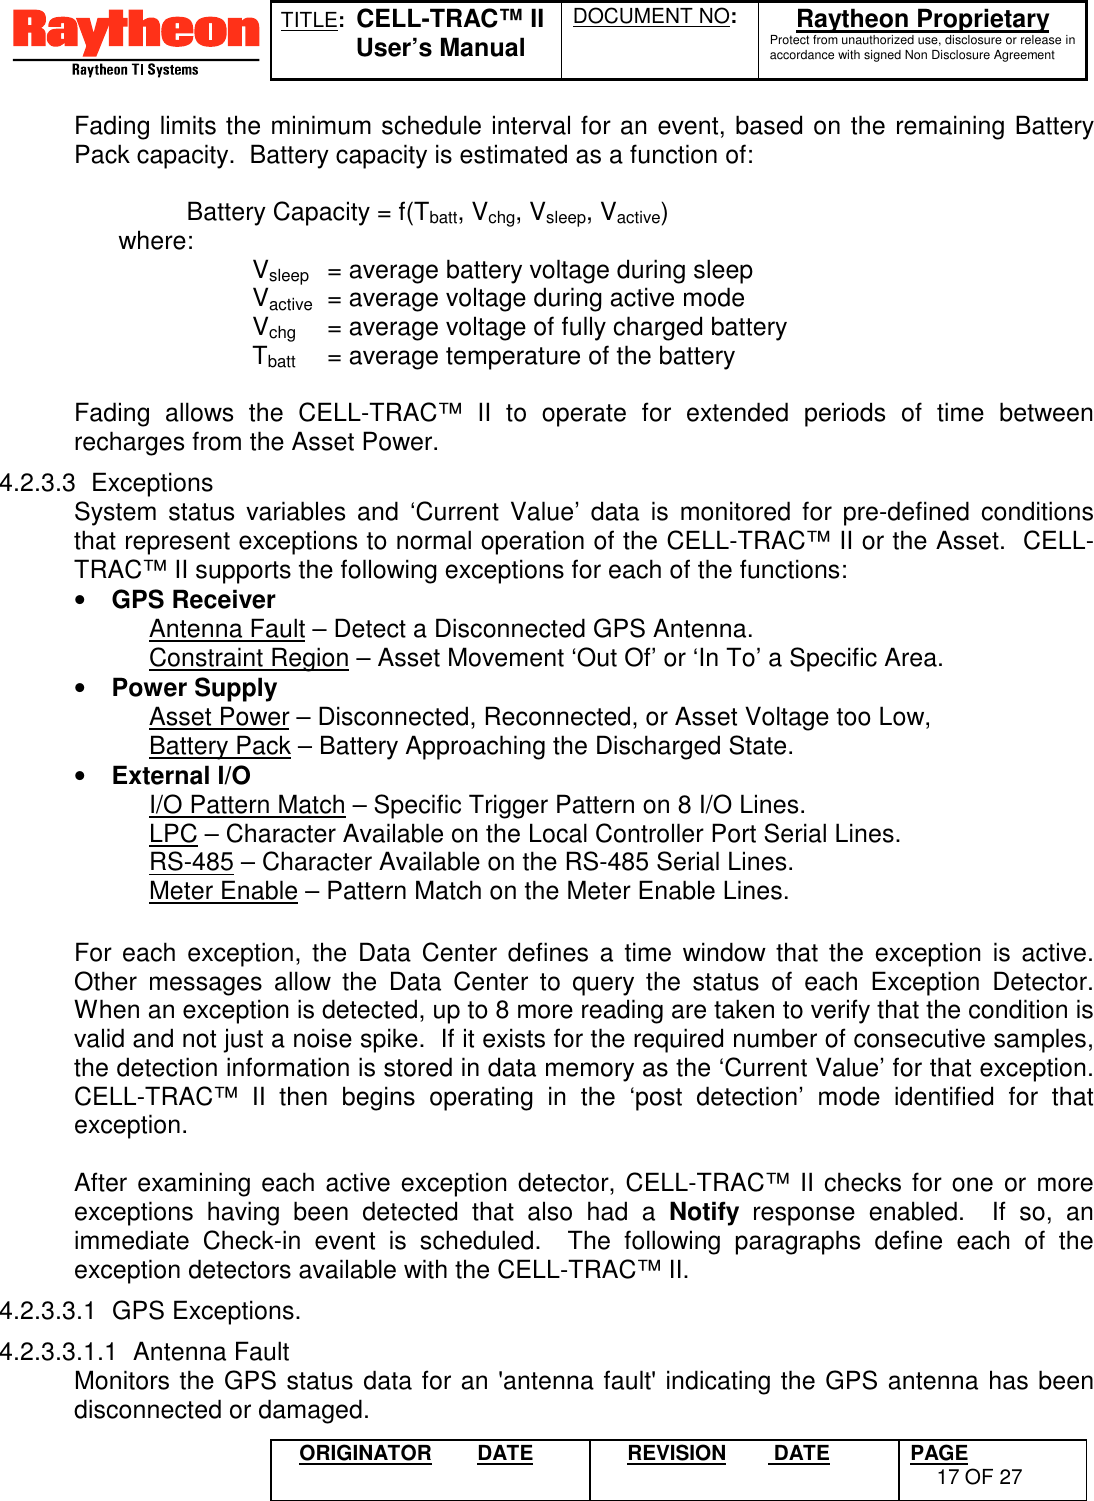 TITLE:  CELL-TRAC™ IIUser’s ManualDOCUMENT NO: Raytheon ProprietaryProtect from unauthorized use, disclosure or release inaccordance with signed Non Disclosure AgreementORIGINATOR DATE REVISION  DATE PAGE17 OF 27Fading limits the minimum schedule interval for an event, based on the remaining BatteryPack capacity.  Battery capacity is estimated as a function of:Battery Capacity = f(Tbatt, Vchg, Vsleep, Vactive) where: Vsleep = average battery voltage during sleepVactive = average voltage during active modeVchg = average voltage of fully charged batteryTbatt = average temperature of the batteryFading allows the CELL-TRAC™ II to operate for extended periods of time betweenrecharges from the Asset Power.4.2.3.3 ExceptionsSystem status variables and ‘Current Value’ data is monitored for pre-defined conditionsthat represent exceptions to normal operation of the CELL-TRAC™ II or the Asset.  CELL-TRAC™ II supports the following exceptions for each of the functions:• GPS Receiver Antenna Fault – Detect a Disconnected GPS Antenna. Constraint Region – Asset Movement ‘Out Of’ or ‘In To’ a Specific Area.• Power Supply Asset Power – Disconnected, Reconnected, or Asset Voltage too Low, Battery Pack – Battery Approaching the Discharged State.• External I/OI/O Pattern Match – Specific Trigger Pattern on 8 I/O Lines.LPC – Character Available on the Local Controller Port Serial Lines.RS-485 – Character Available on the RS-485 Serial Lines.Meter Enable – Pattern Match on the Meter Enable Lines.For each exception, the Data Center defines a time window that the exception is active.Other messages allow the Data Center to query the status of each Exception Detector.When an exception is detected, up to 8 more reading are taken to verify that the condition isvalid and not just a noise spike.  If it exists for the required number of consecutive samples,the detection information is stored in data memory as the ‘Current Value’ for that exception.CELL-TRAC™ II then begins operating in the ‘post detection’ mode identified for thatexception.After examining each active exception detector, CELL-TRAC™ II checks for one or moreexceptions having been detected that also had a Notify response enabled.  If so, animmediate Check-in event is scheduled.  The following paragraphs define each of theexception detectors available with the CELL-TRAC™ II.4.2.3.3.1 GPS Exceptions.4.2.3.3.1.1 Antenna FaultMonitors the GPS status data for an &apos;antenna fault&apos; indicating the GPS antenna has beendisconnected or damaged.